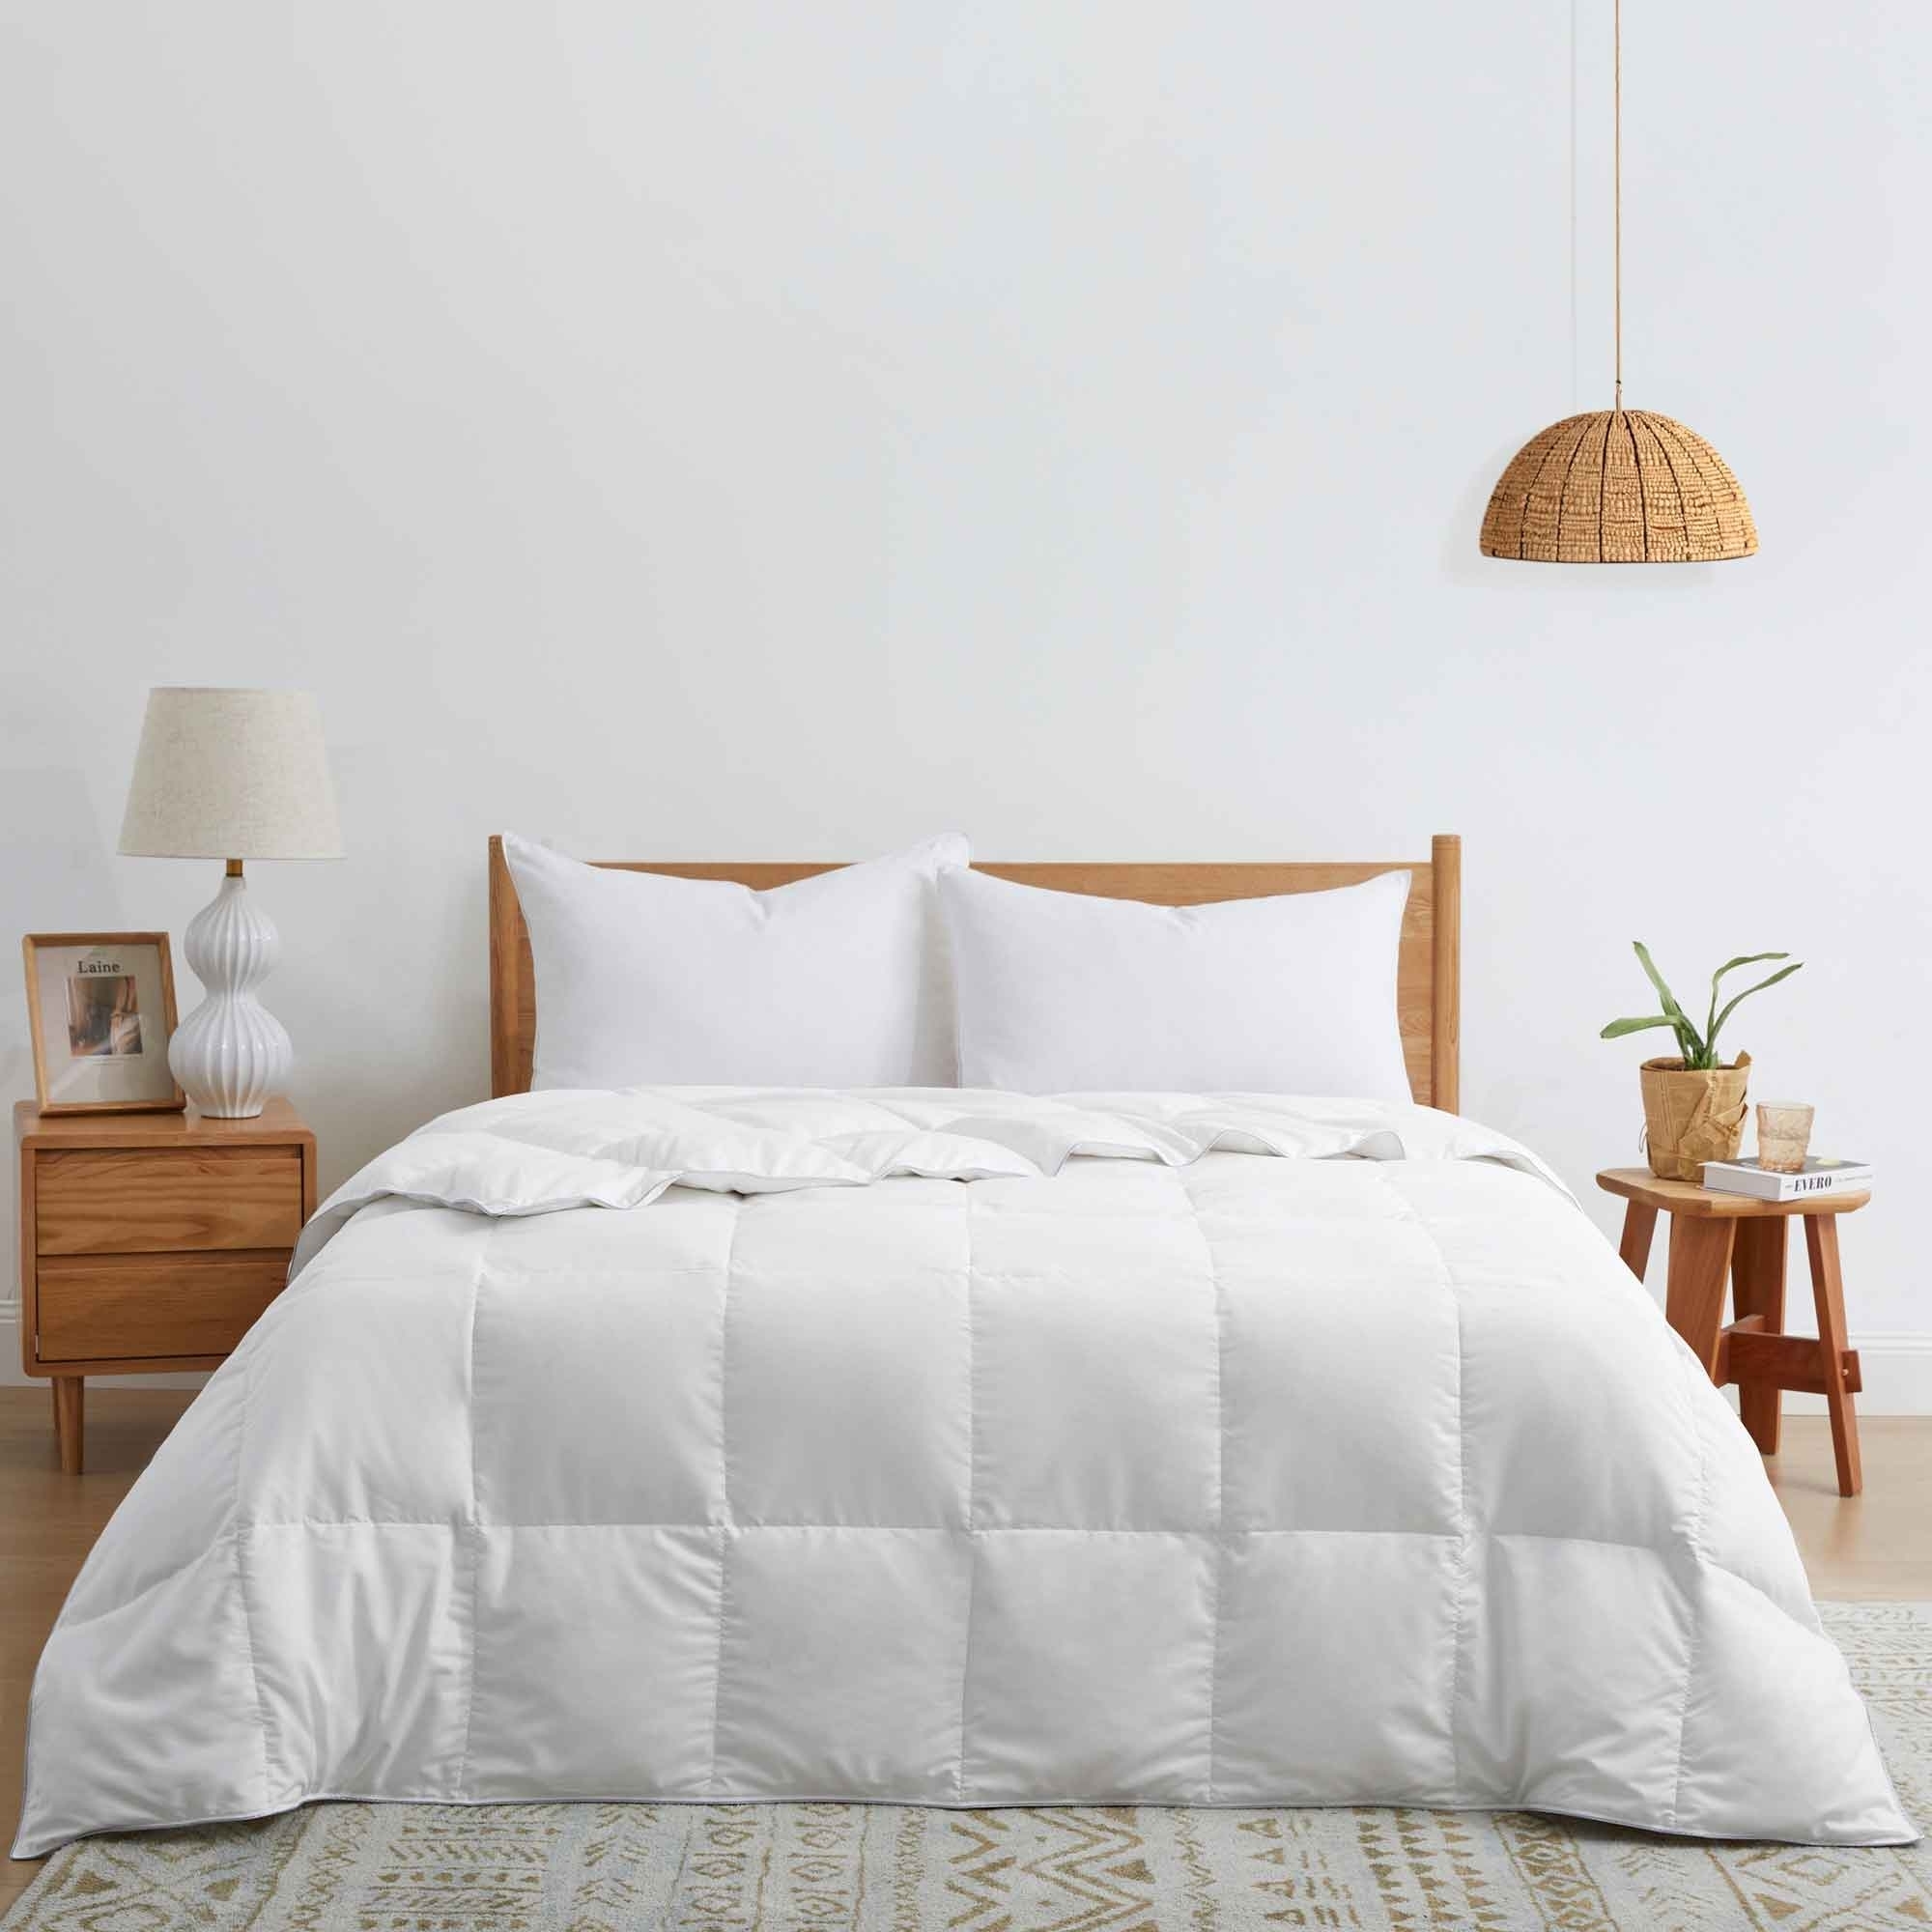 Lightweight Goose Feather And Down Comforter- Hotel Collection For Hot Sleepers - Ginger Root, California King